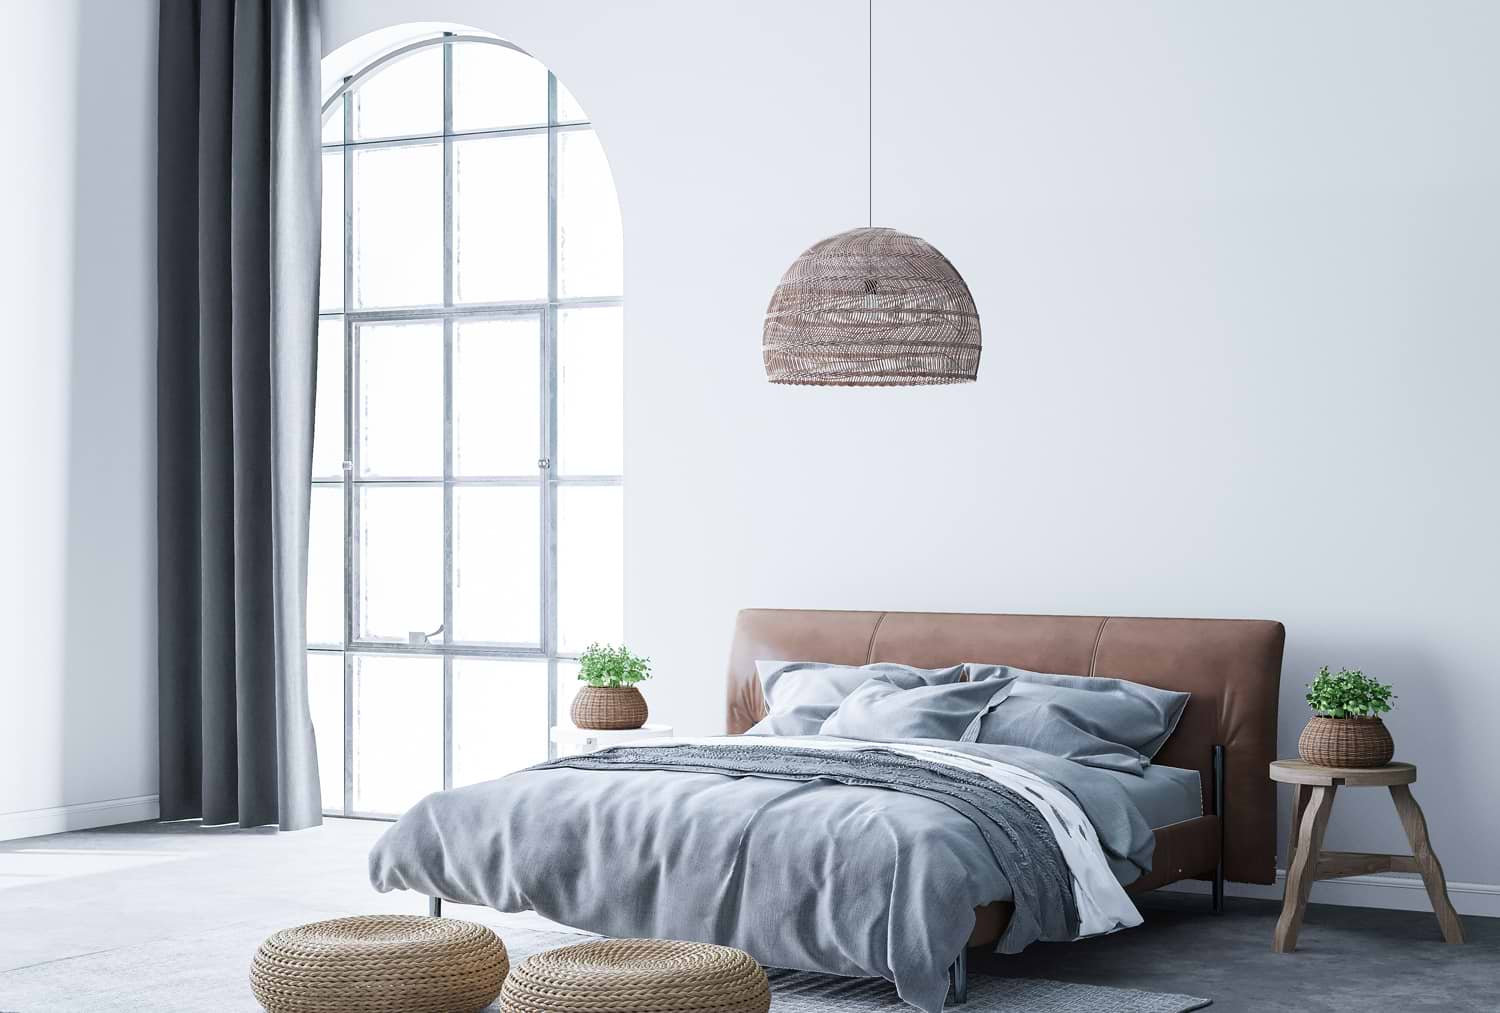 HOW-TO-CHOOSE-THE-RIGHT-BEDFRAME-WHAT-TO-CONSIDER-WHEN-BUYING-A-BEDFRAME-THAT-IS-PERFECT-FOR-YOU